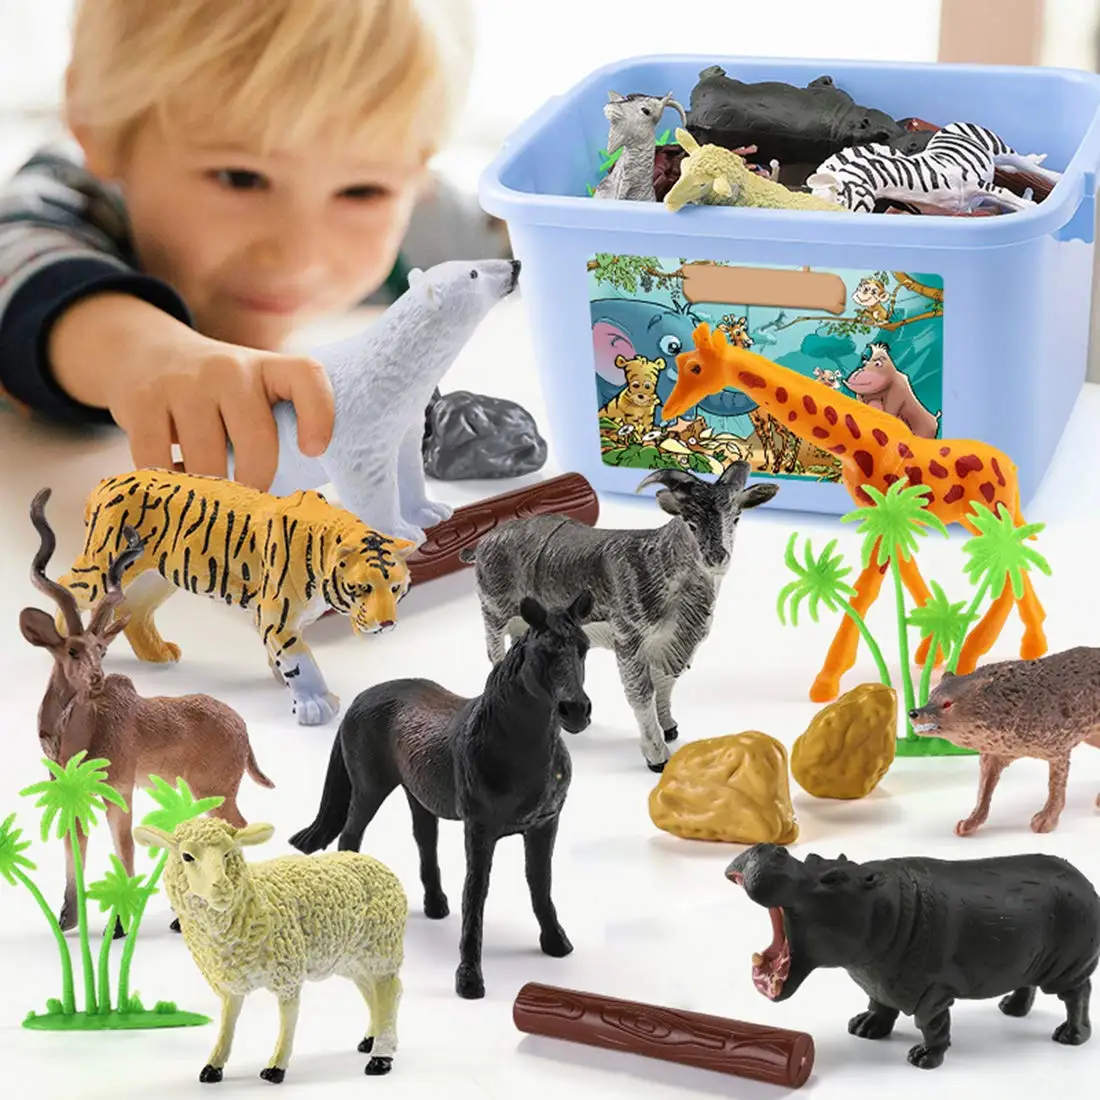 

58PCS/Set Mini Jungle Animals Toys Set Animal Figures,World Zoo, Forest Toy for Children with Strong Box Animal World